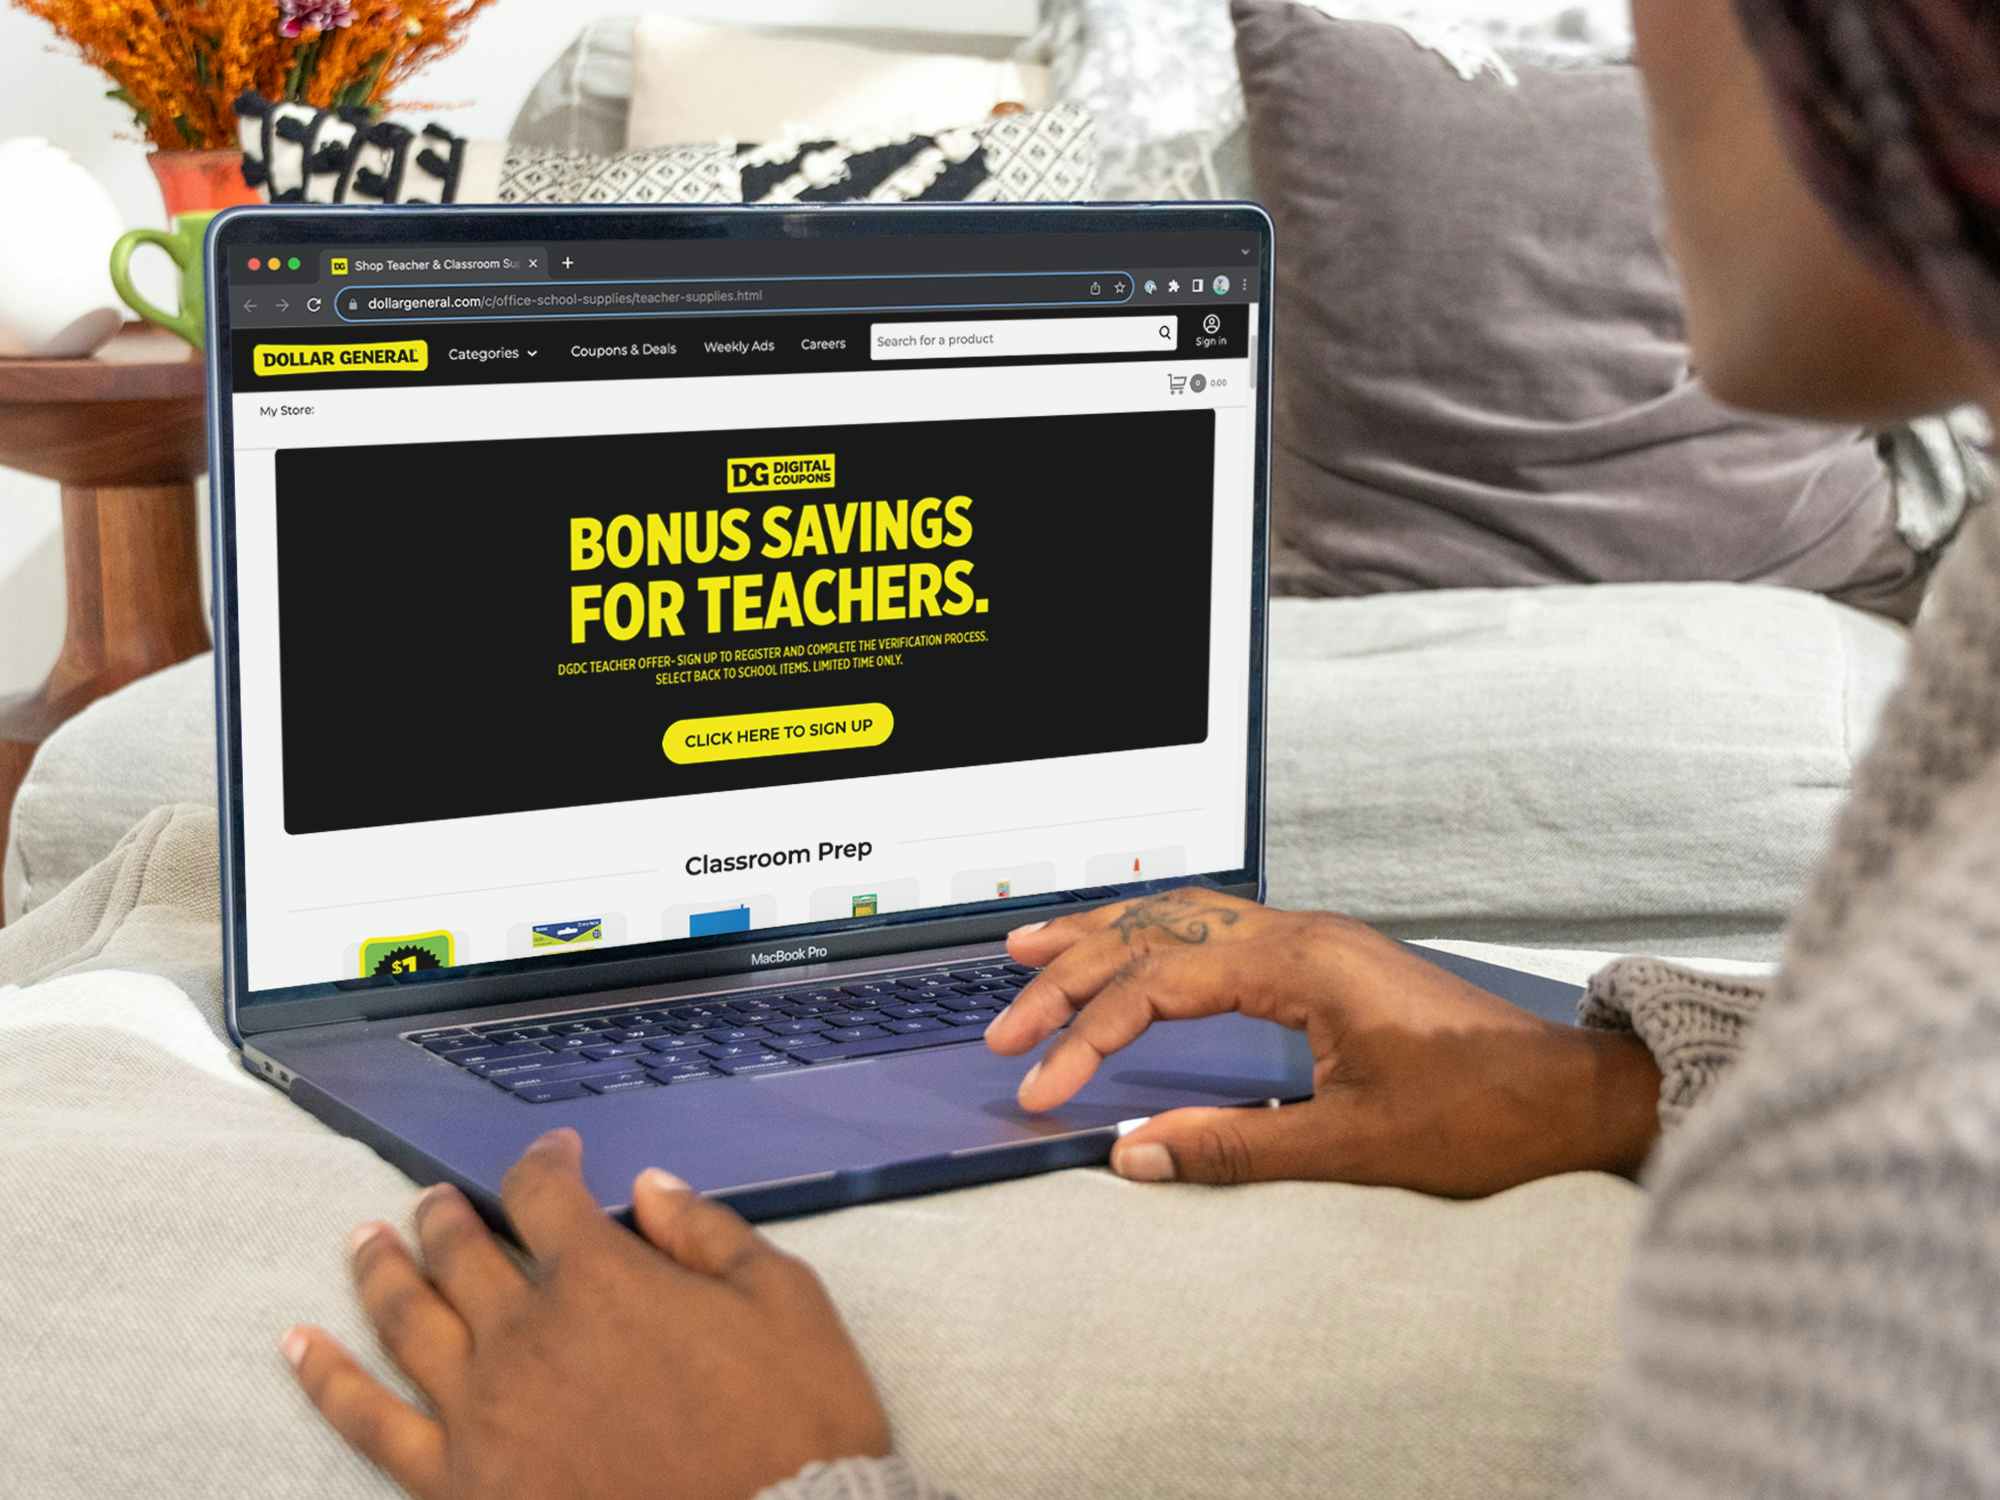 Someone looking on the Dollar General website page for the Teacher Discount